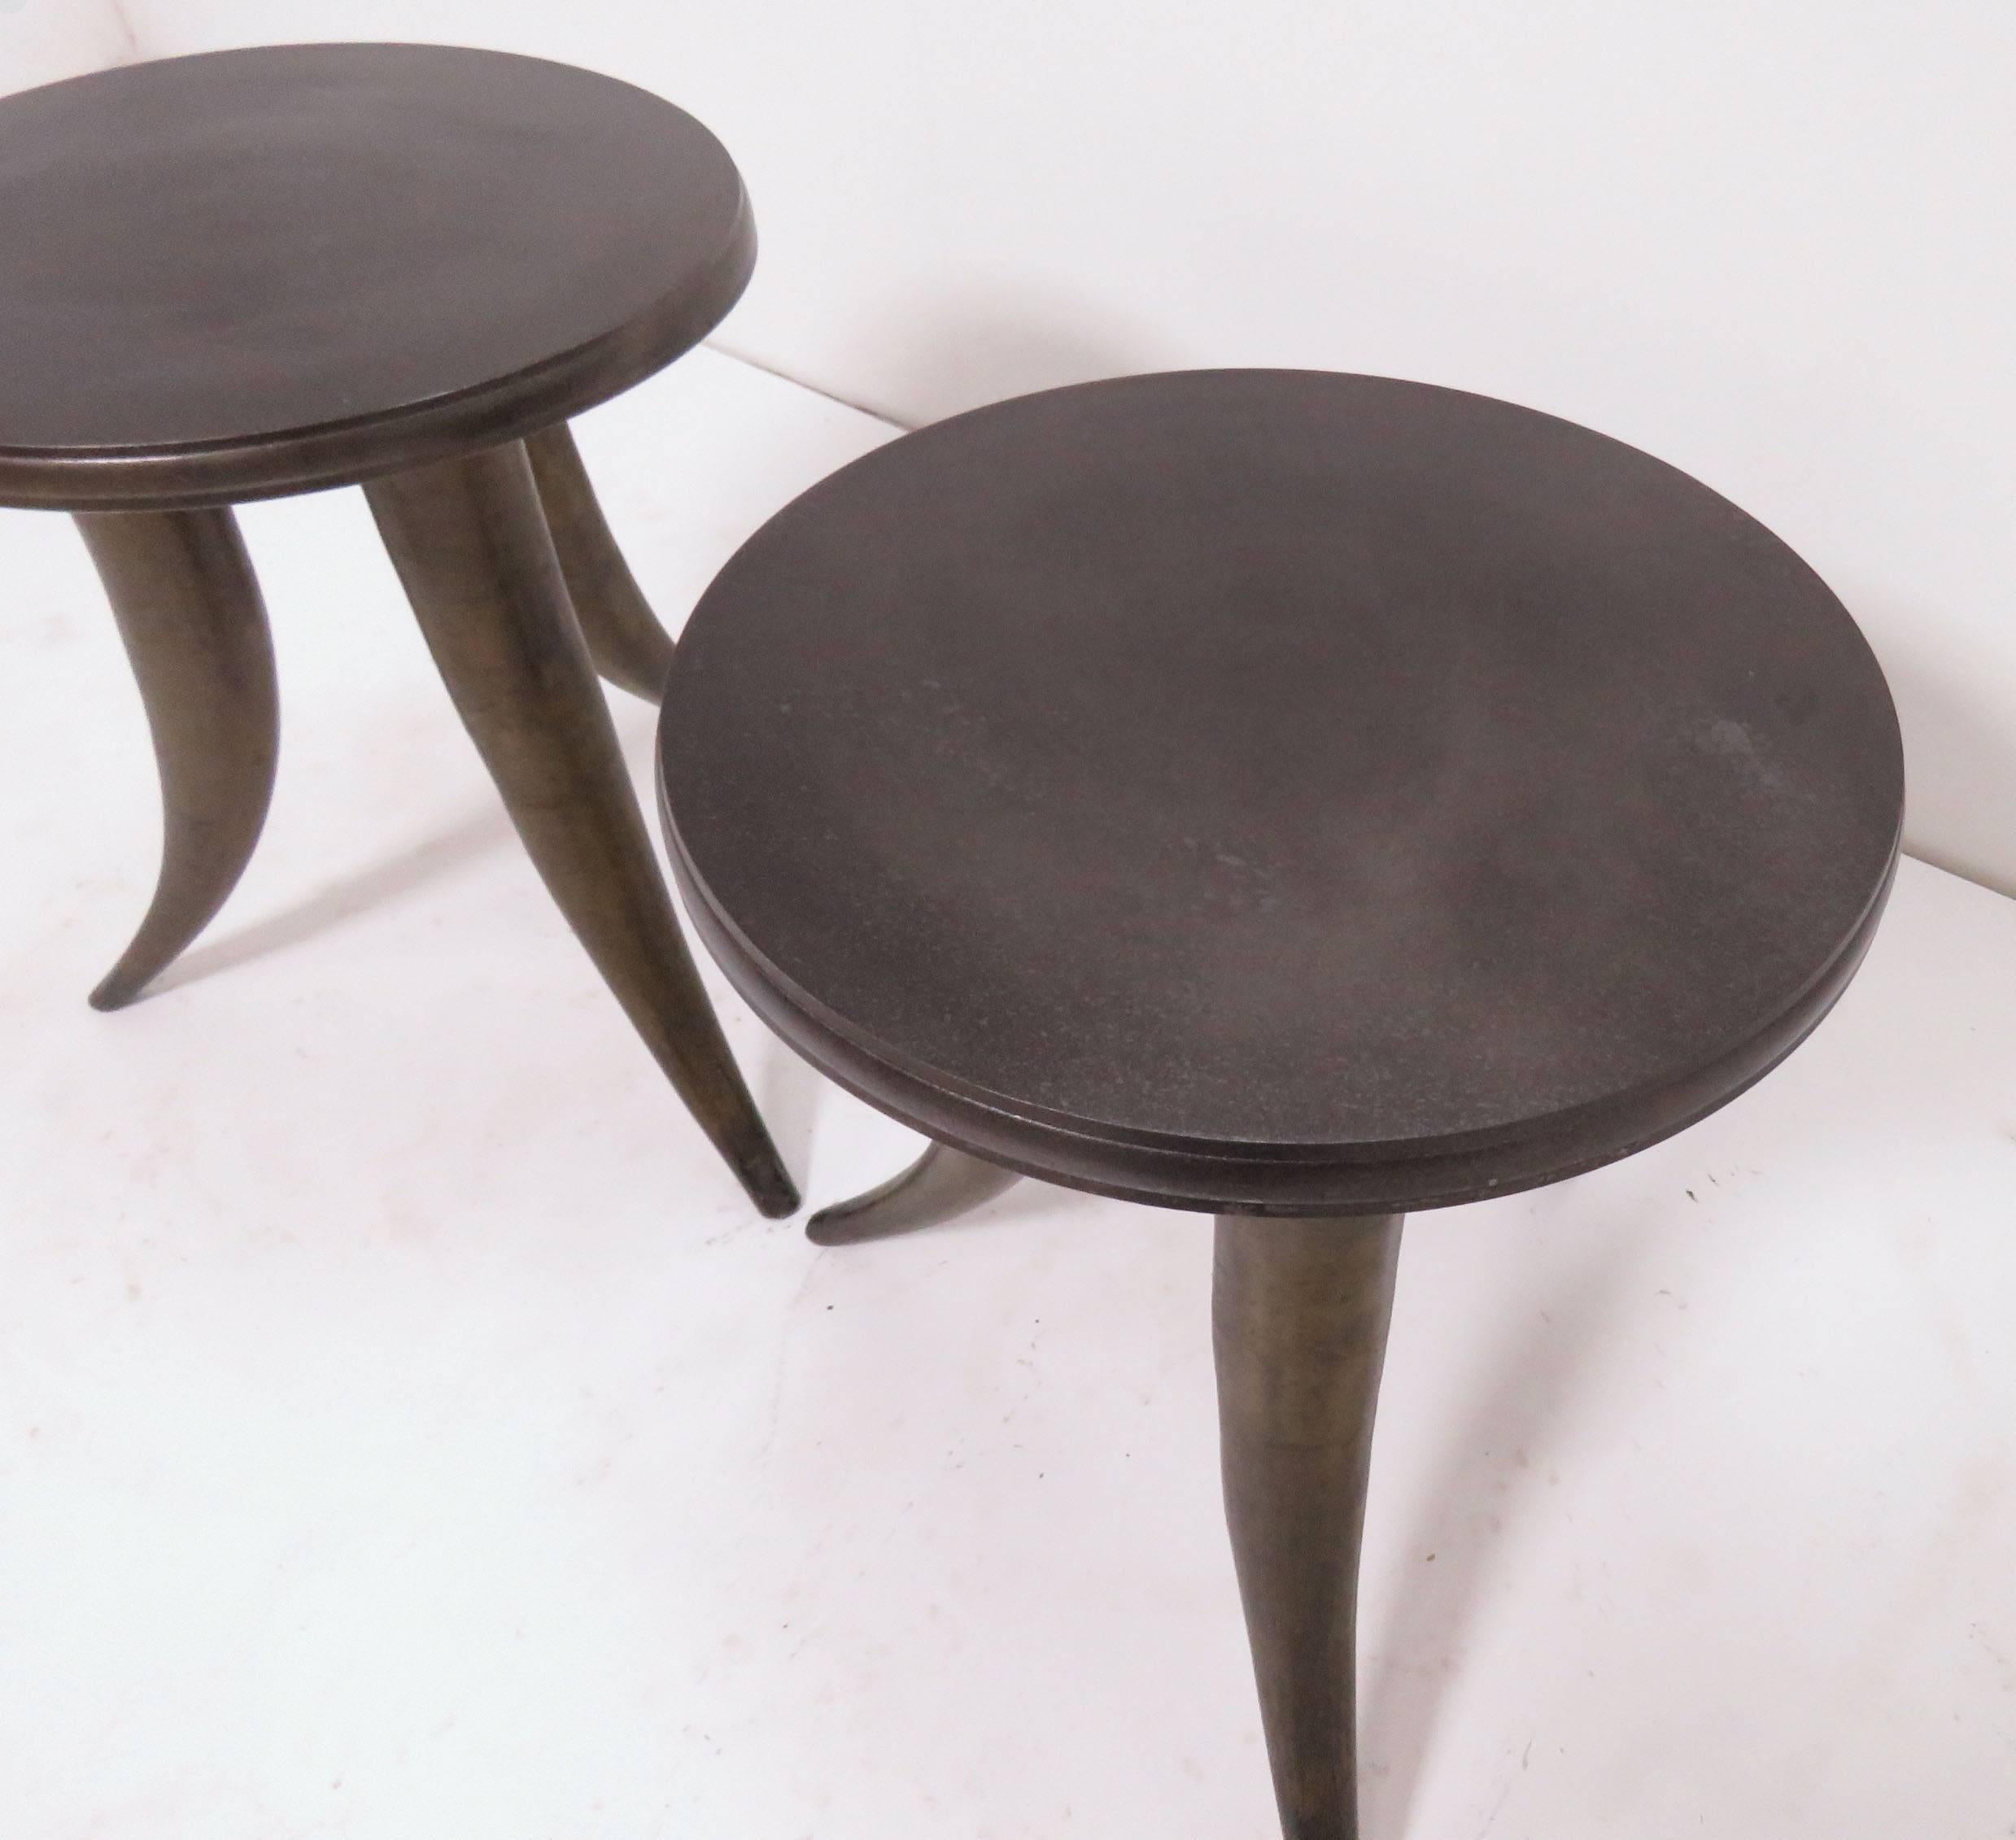 Metal Pair of Side Tables or Stools with Tusk Form Legs, circa 1960s